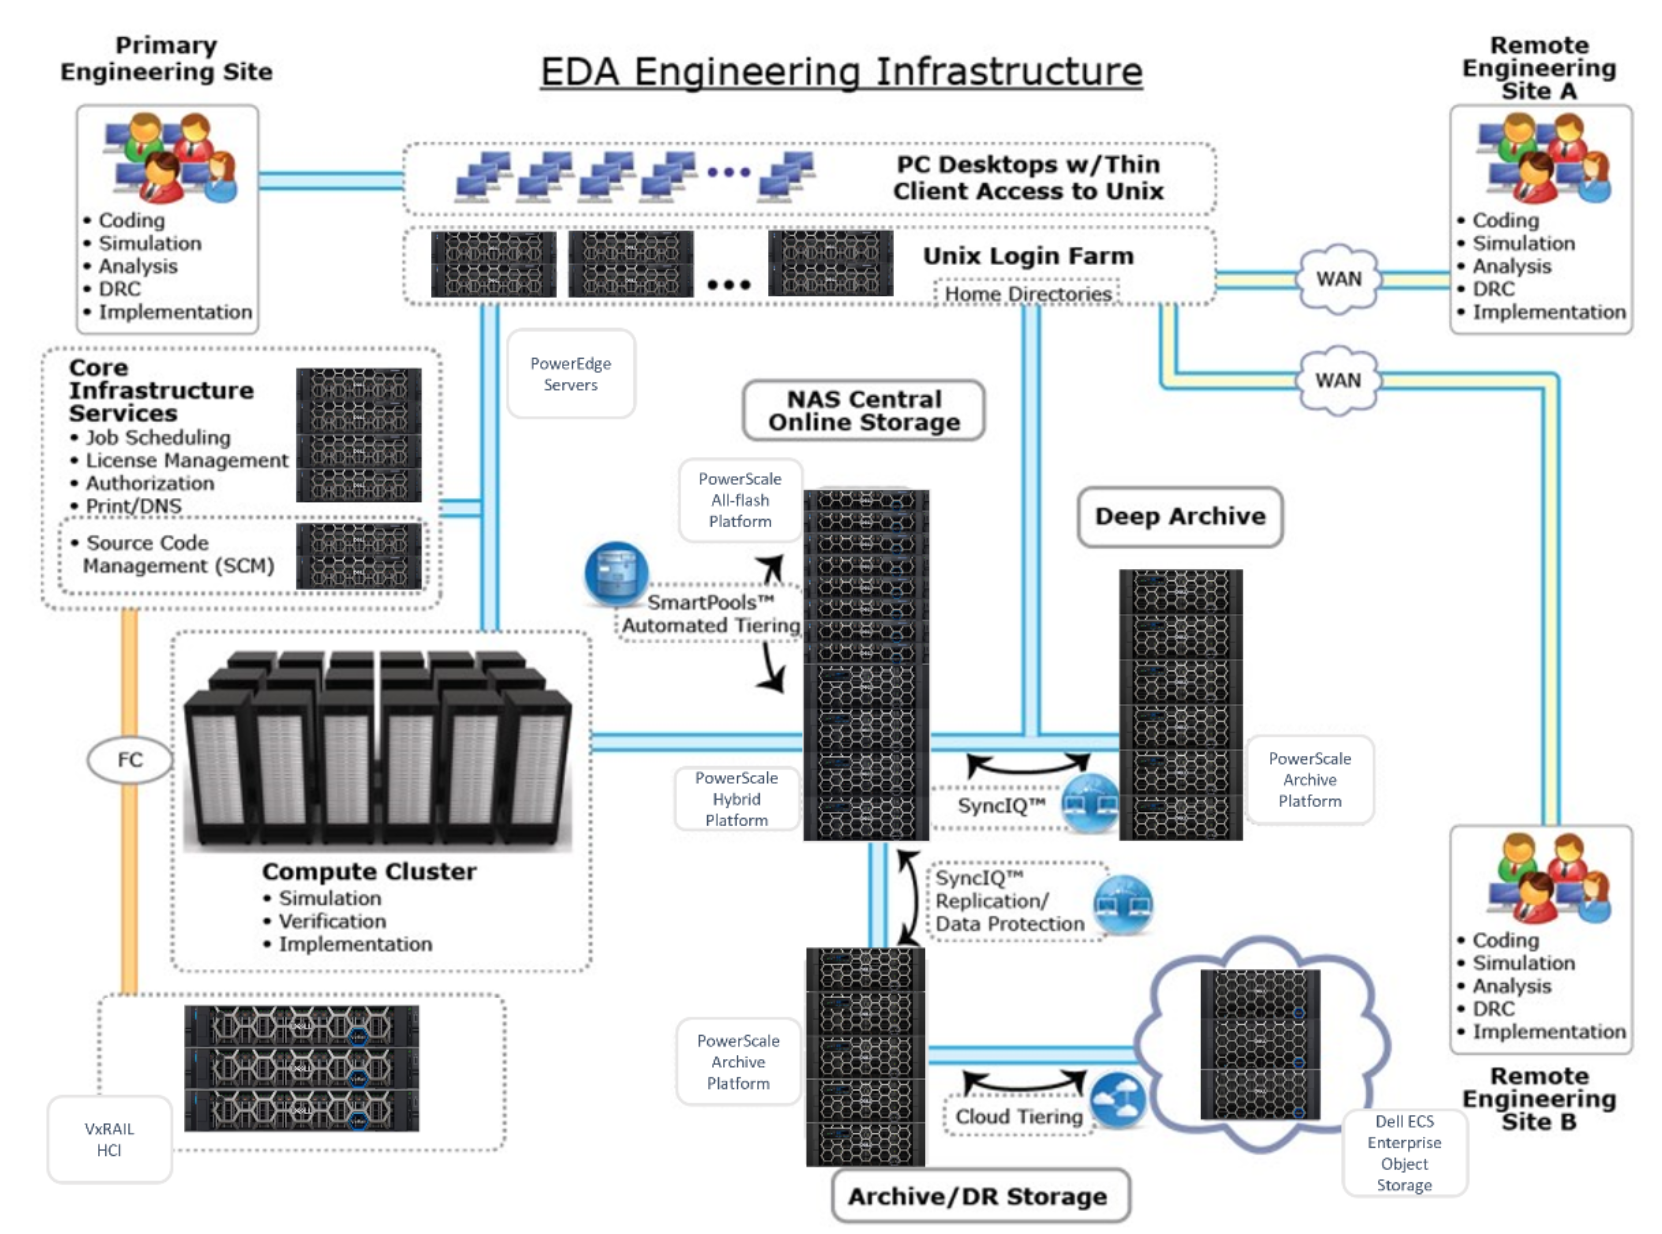 Illustrated example of EDA engineering infrastructure model.